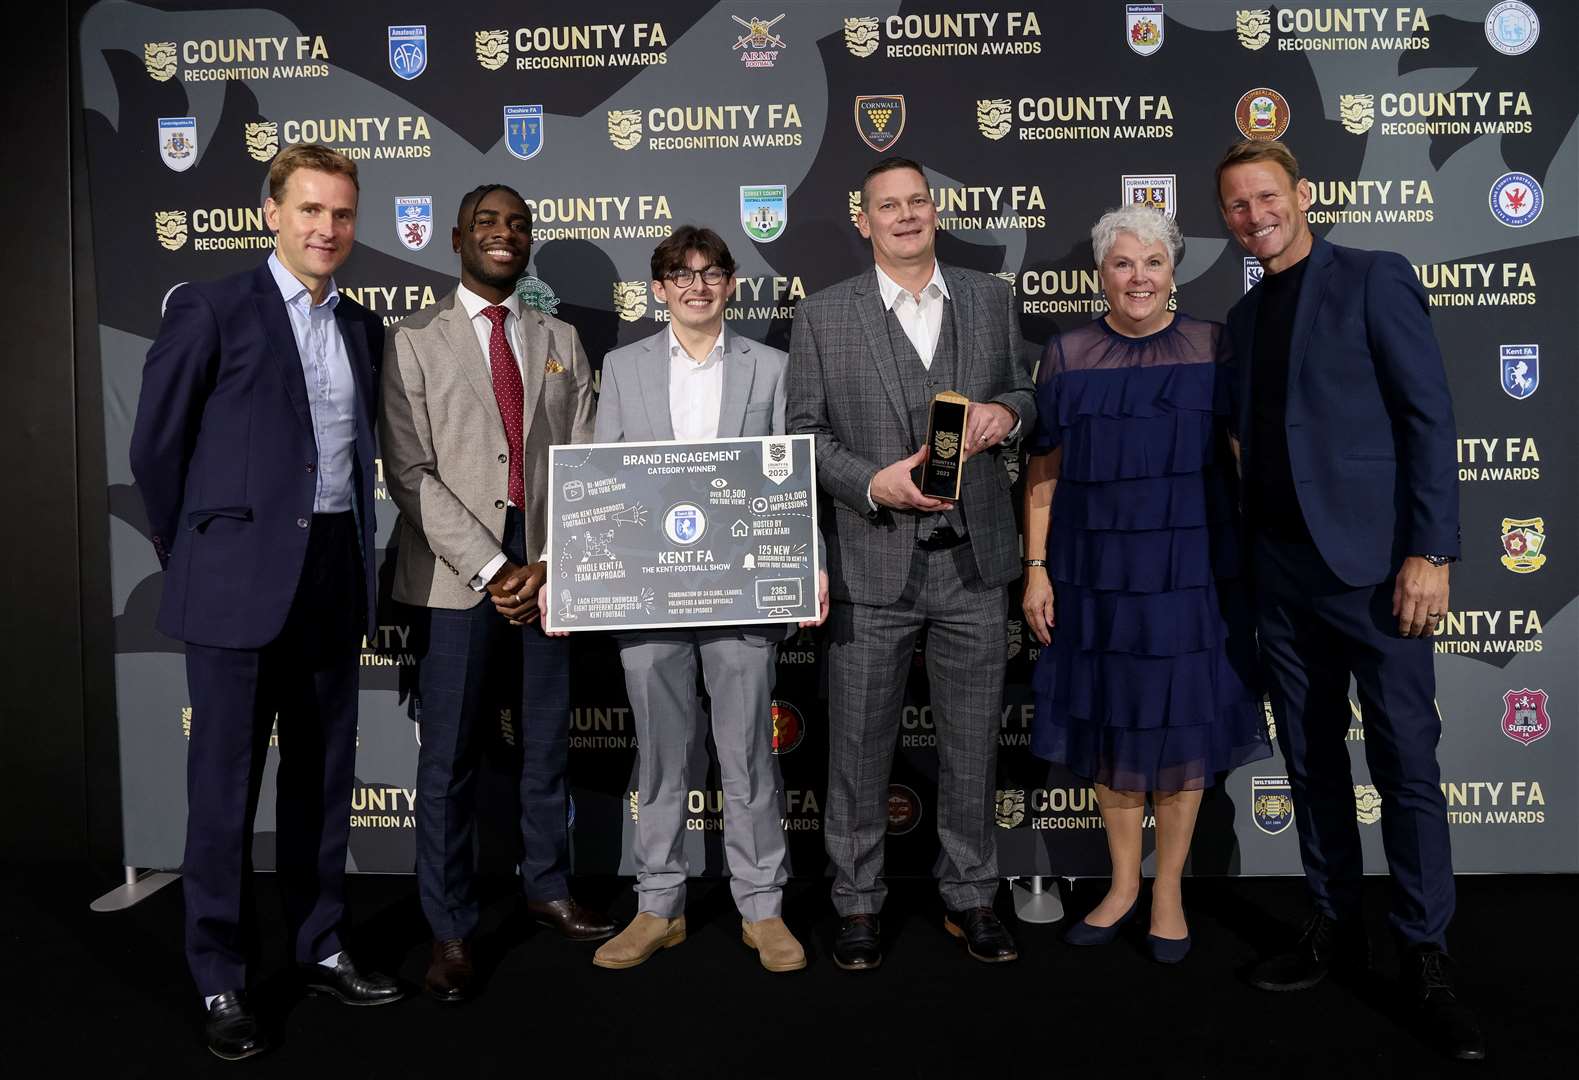 The Kent FA collect the Brand Engagement Award at the County FA Recognition Awards at Wembley Stadium. Picture: The FA/The FA via Getty Images